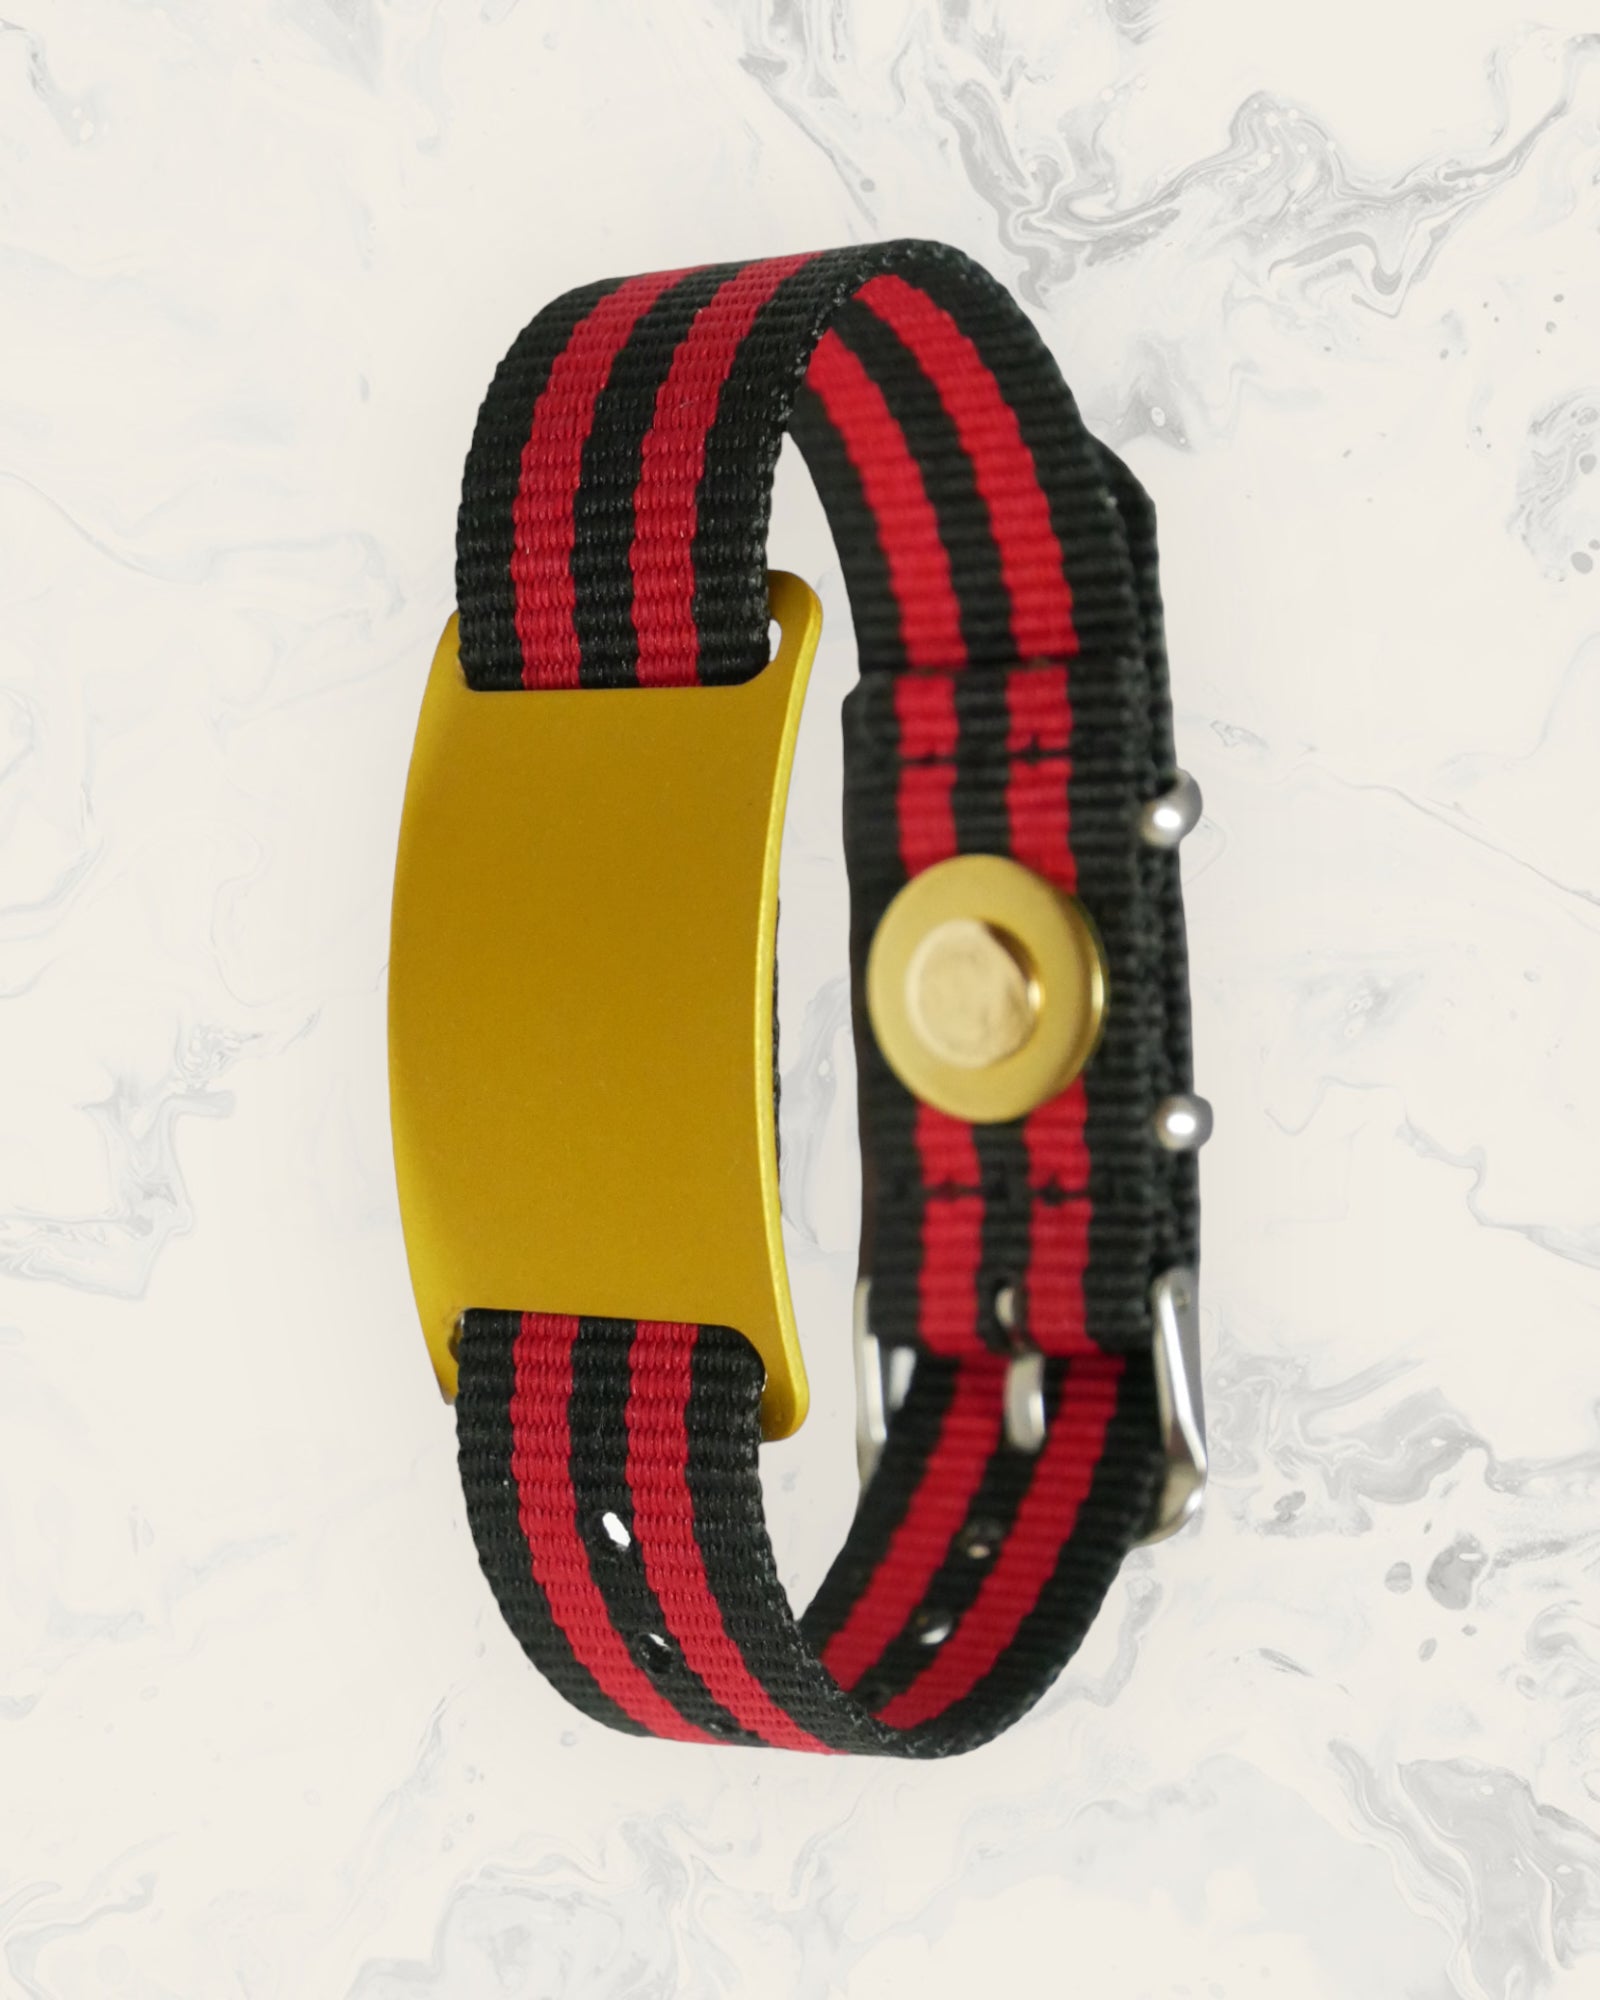 Frequency Jewelry Natural Pain Relief and EMF Protection Bracelet Nylon Band Color Black and Red Striped with a Gold Slider